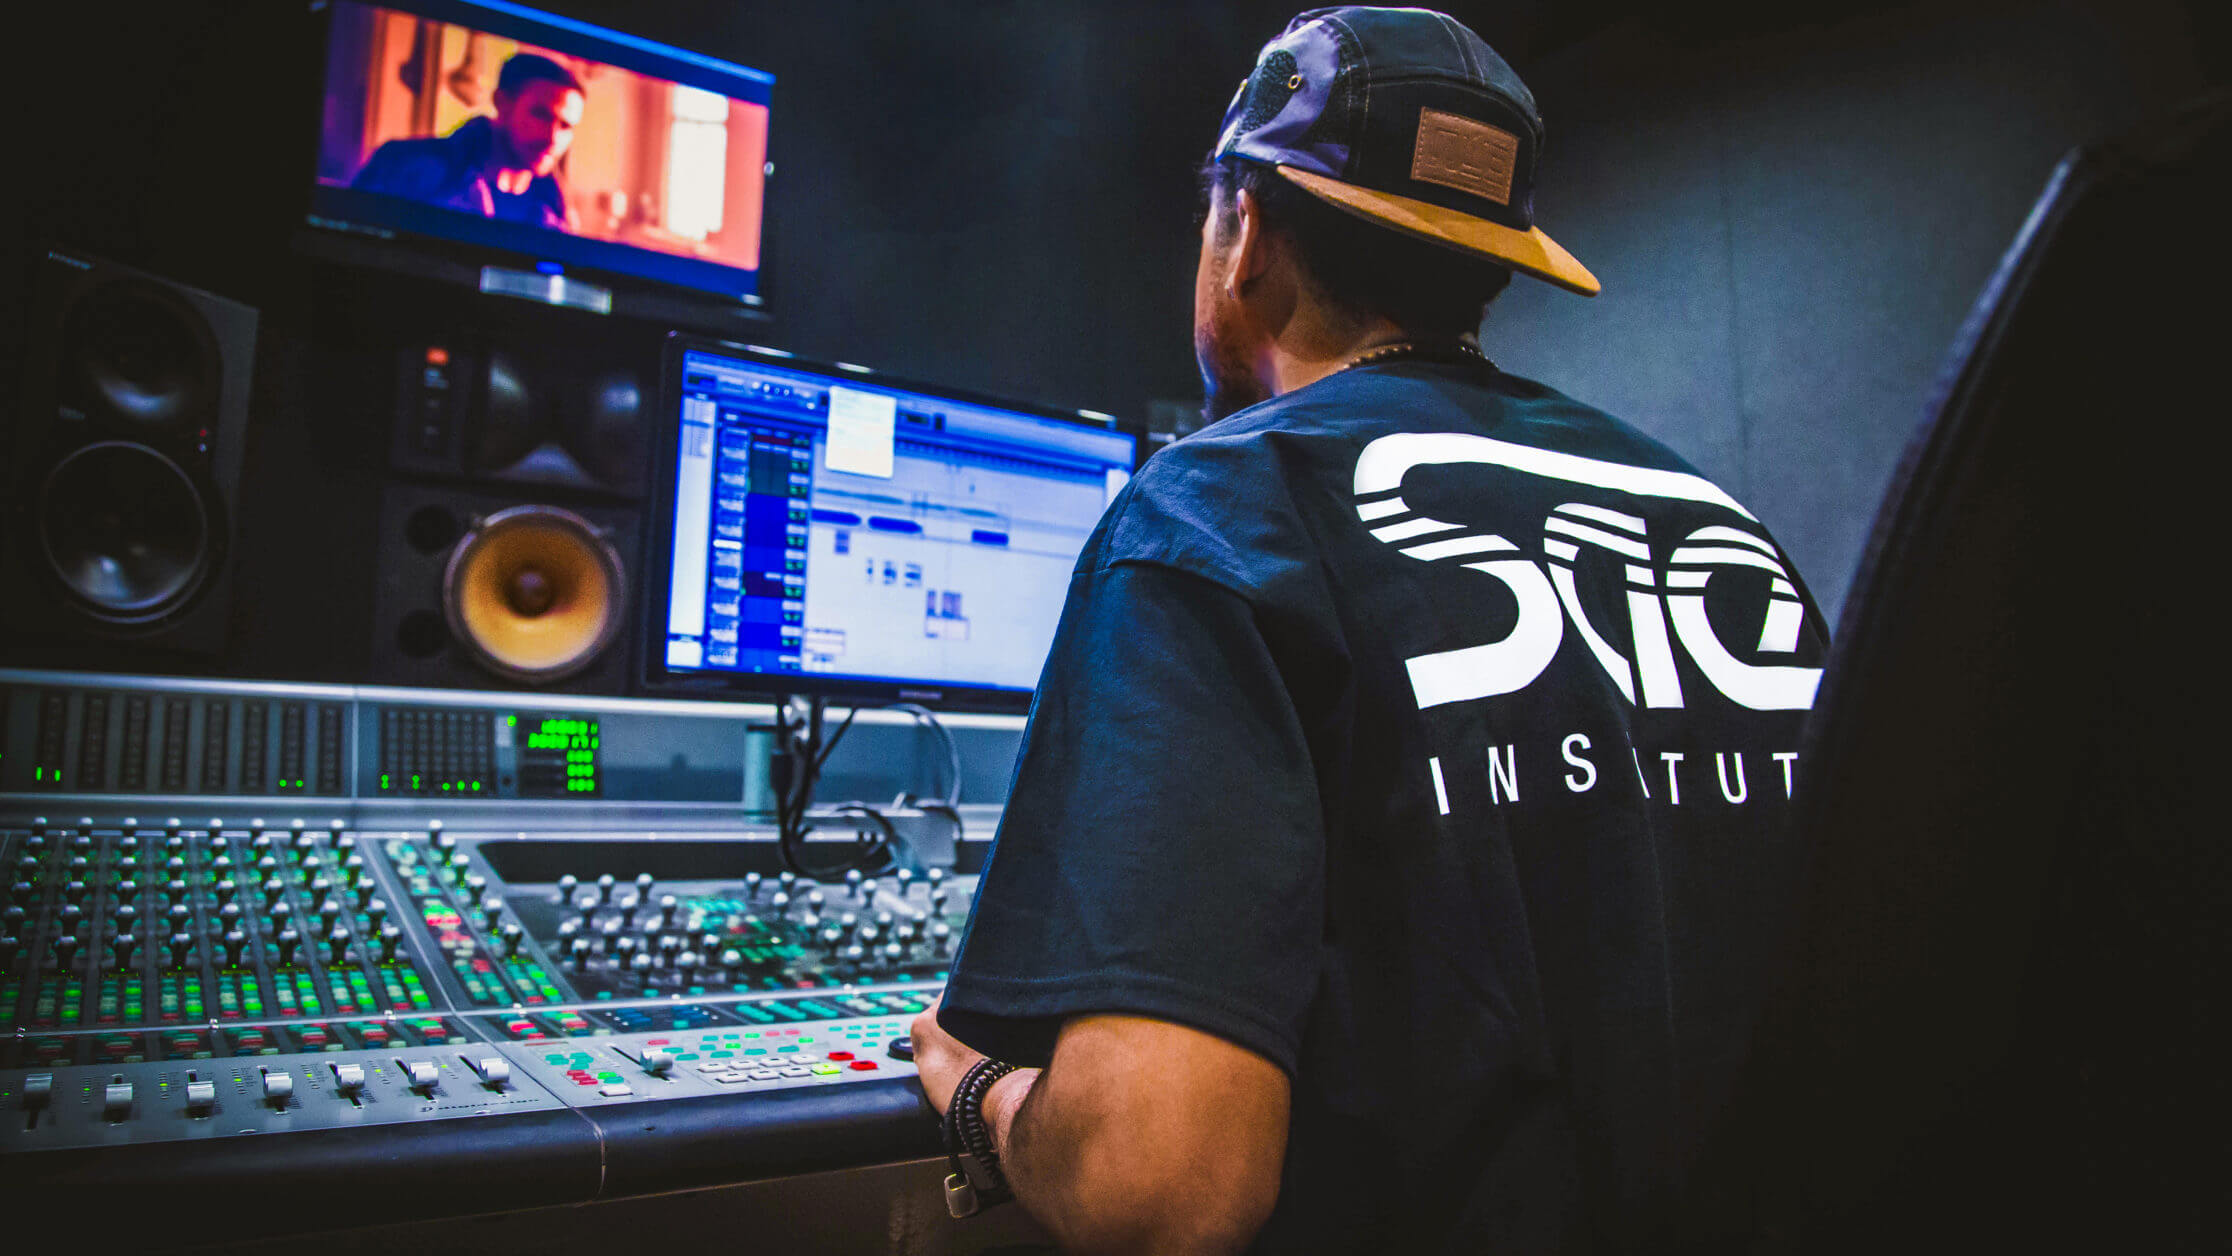 Study Audio - SAE Institute Audio Engineering and Technology Programs